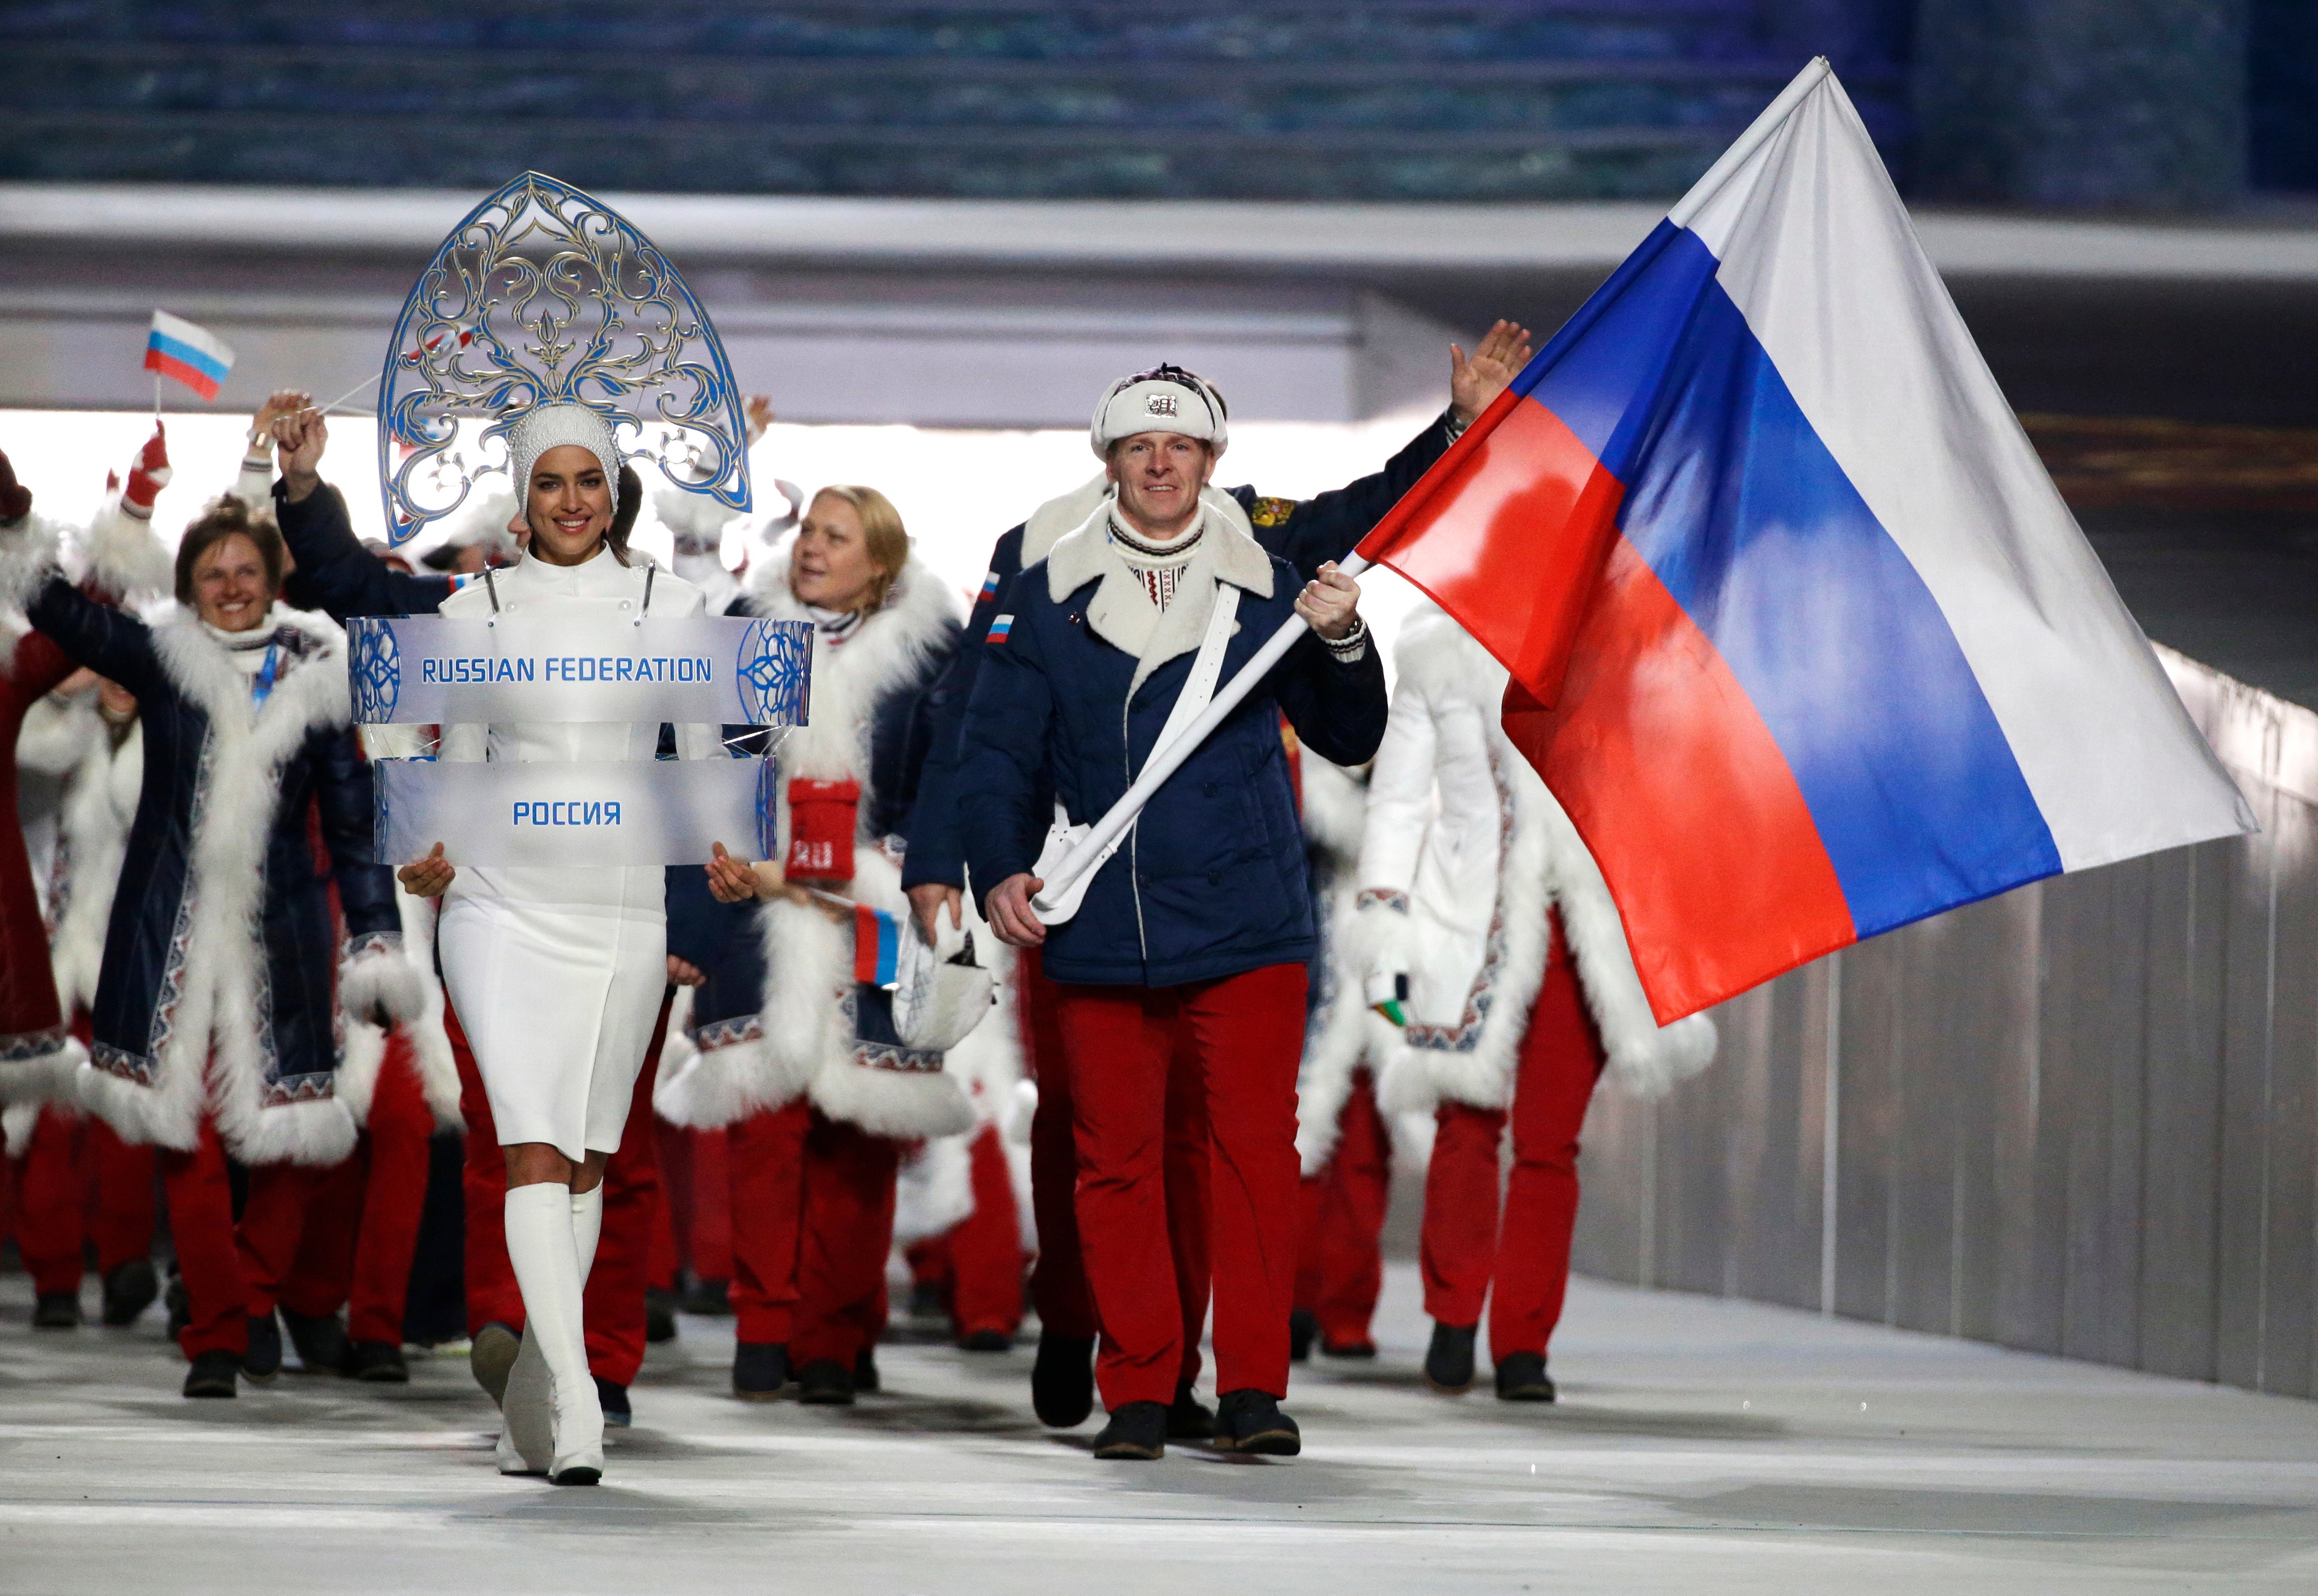 Russia has lost an appeal against its suspension by the IOC